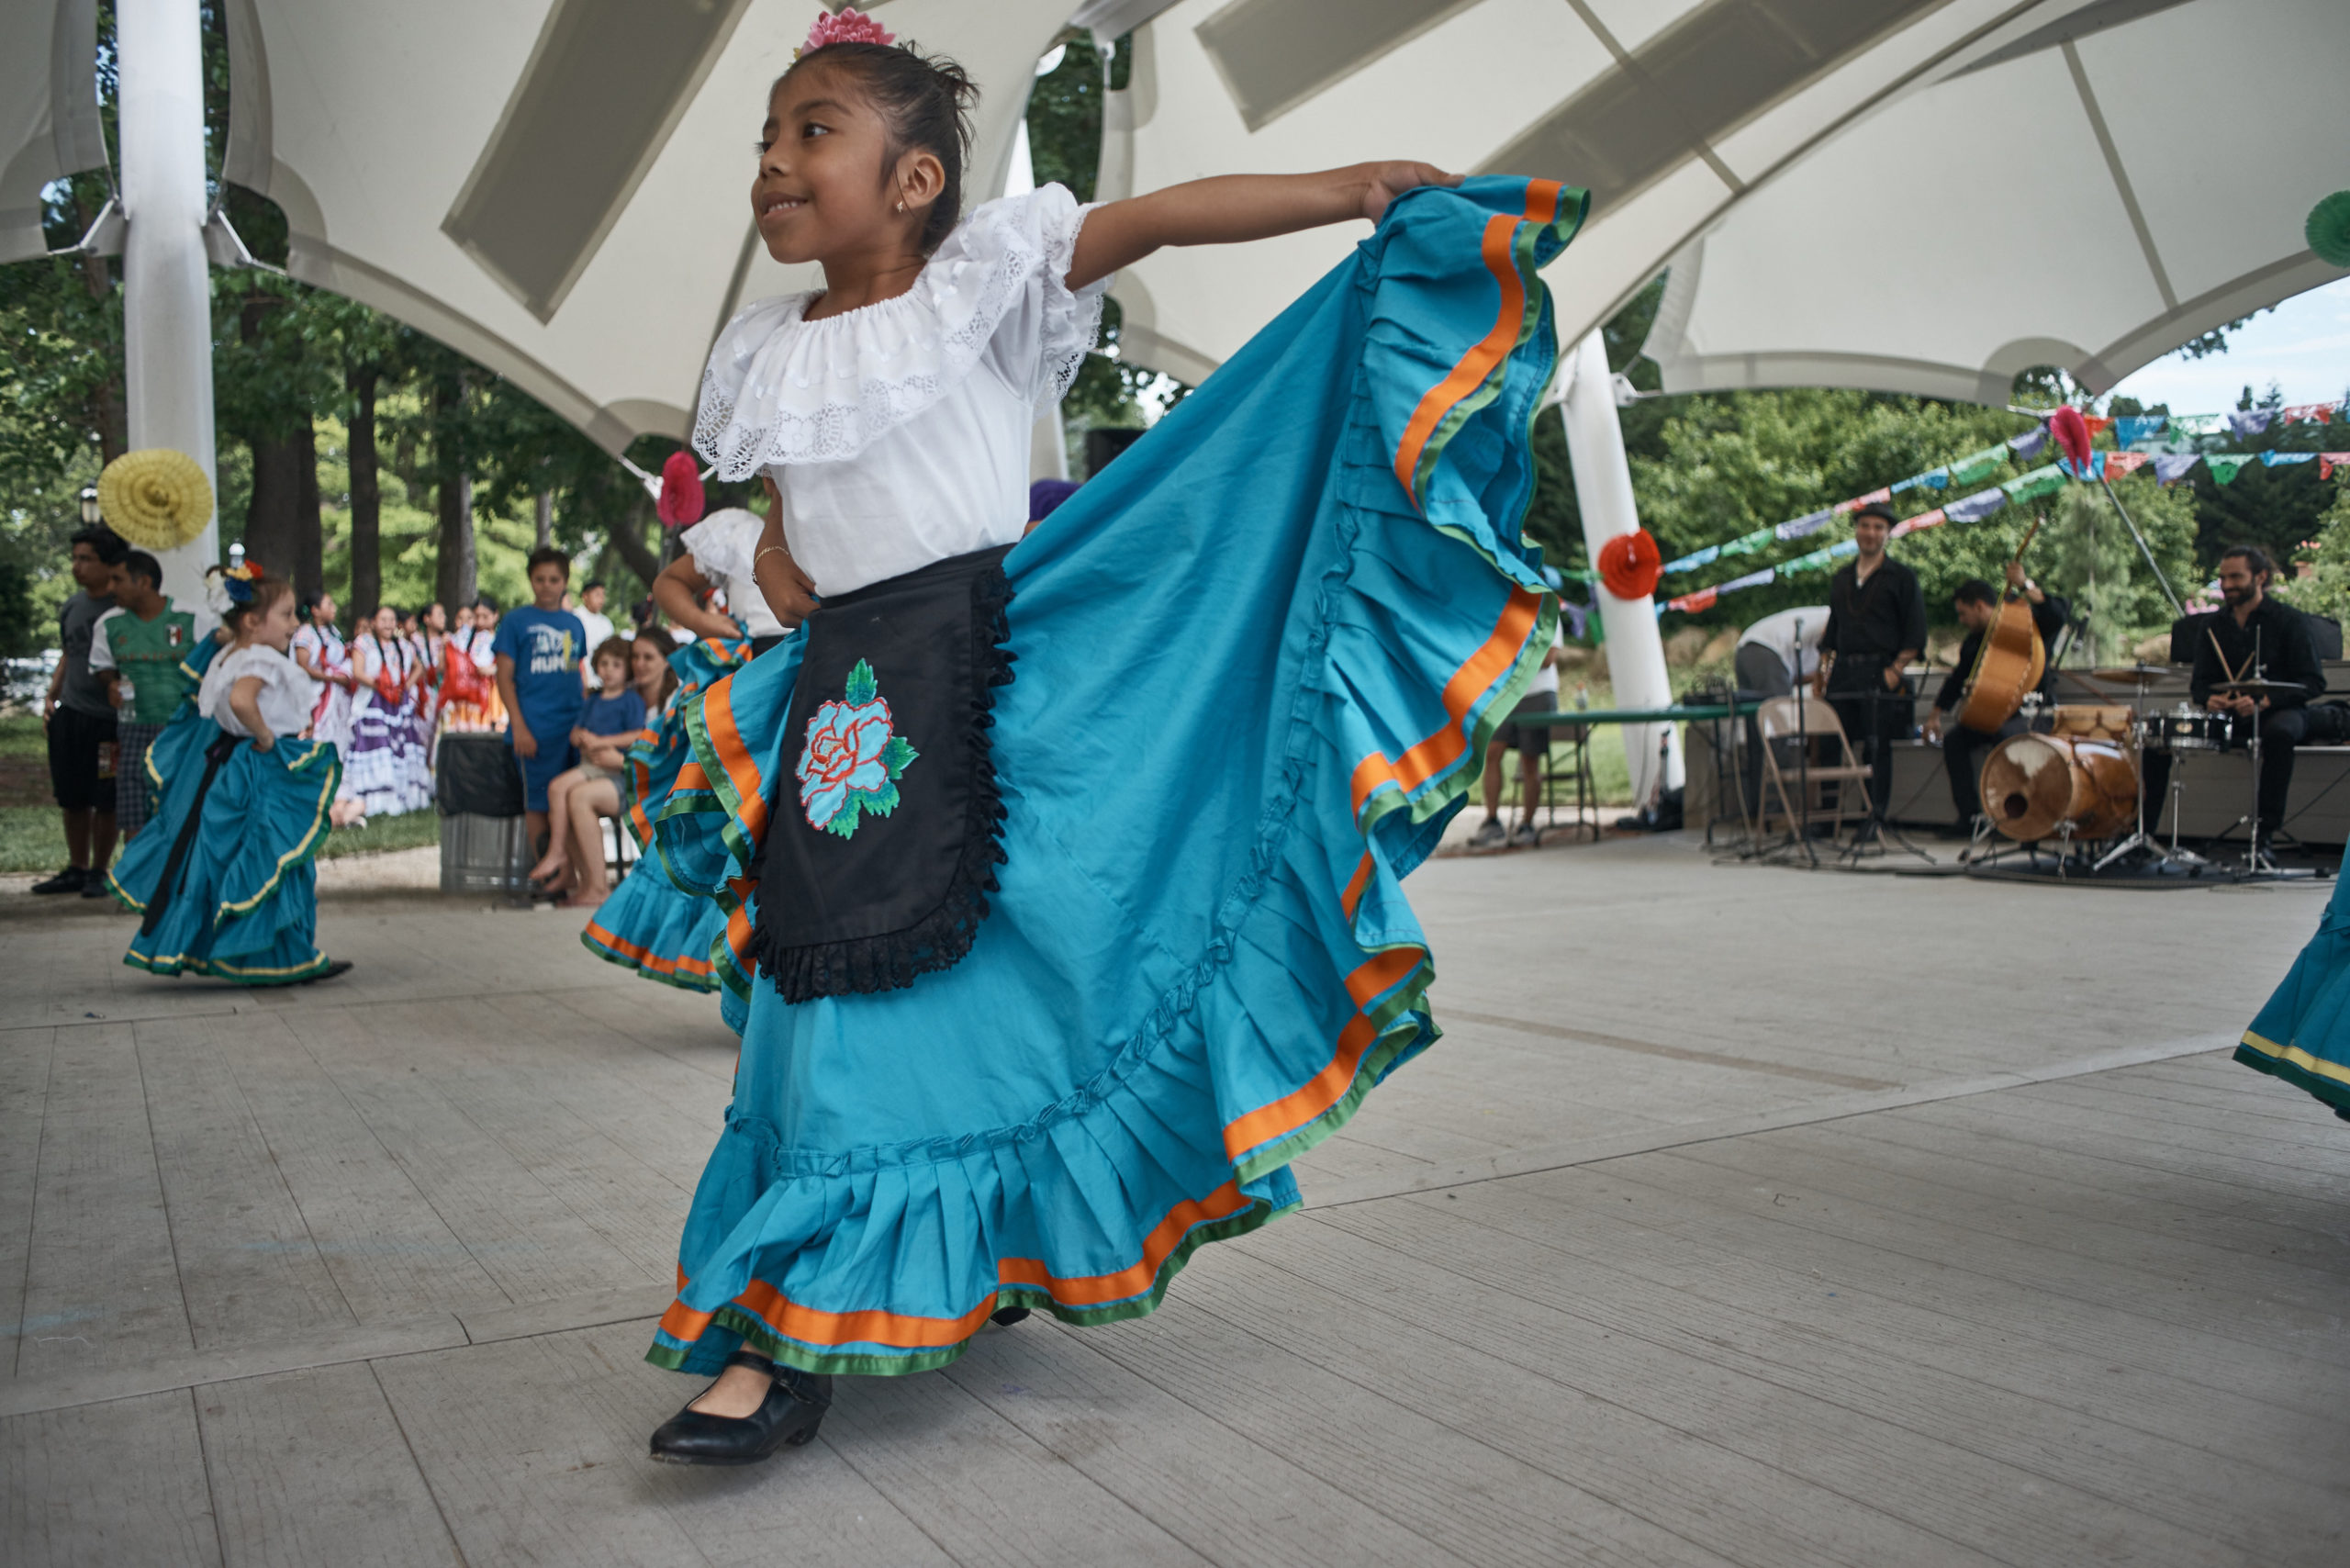 young girl dancing in traditional Mexican clothing